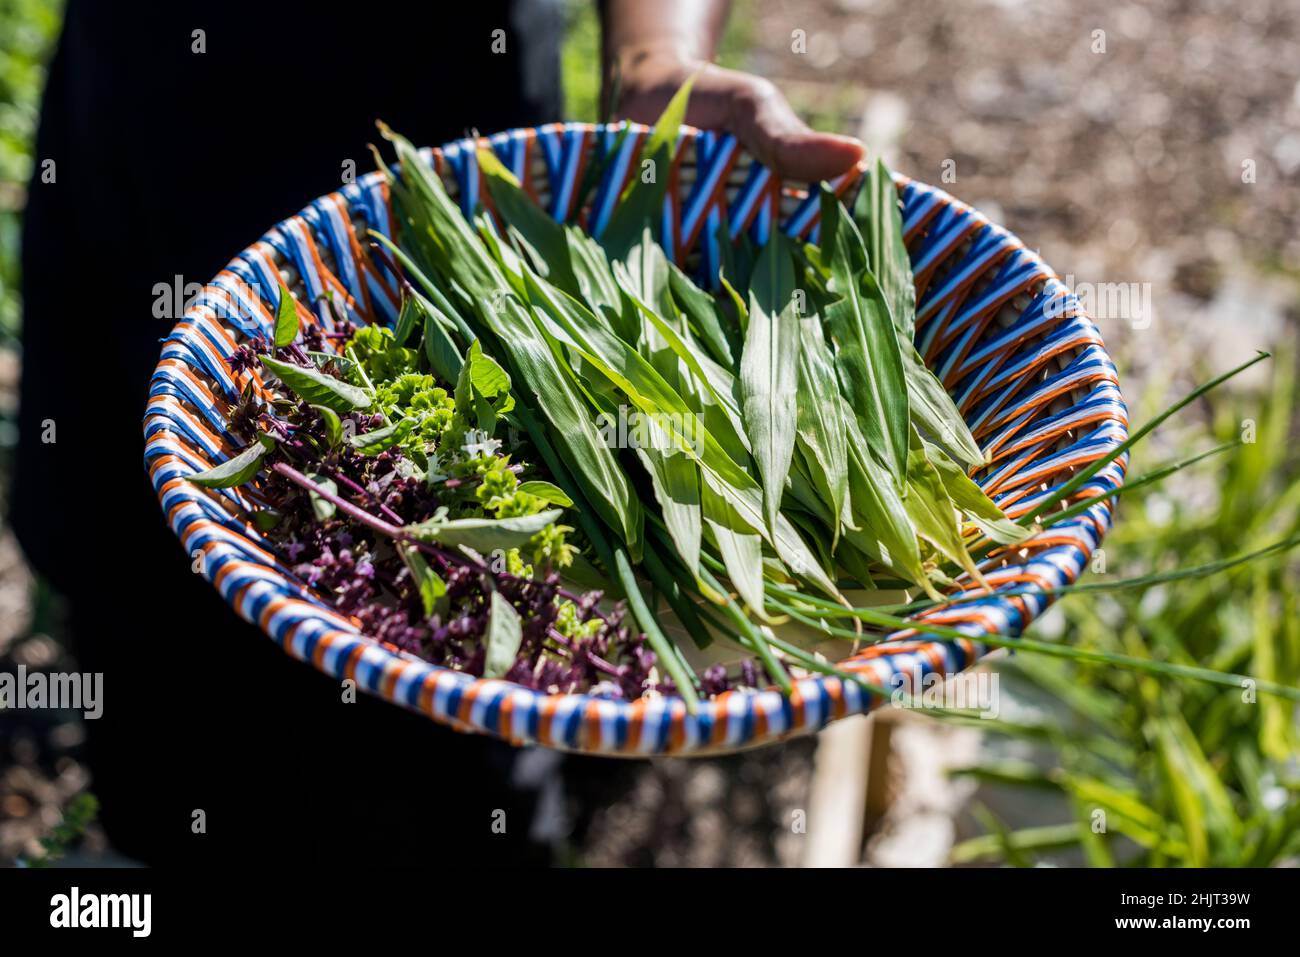 Chef holding basket of fam harvested basil flowers and ginger leaves Stock Photo